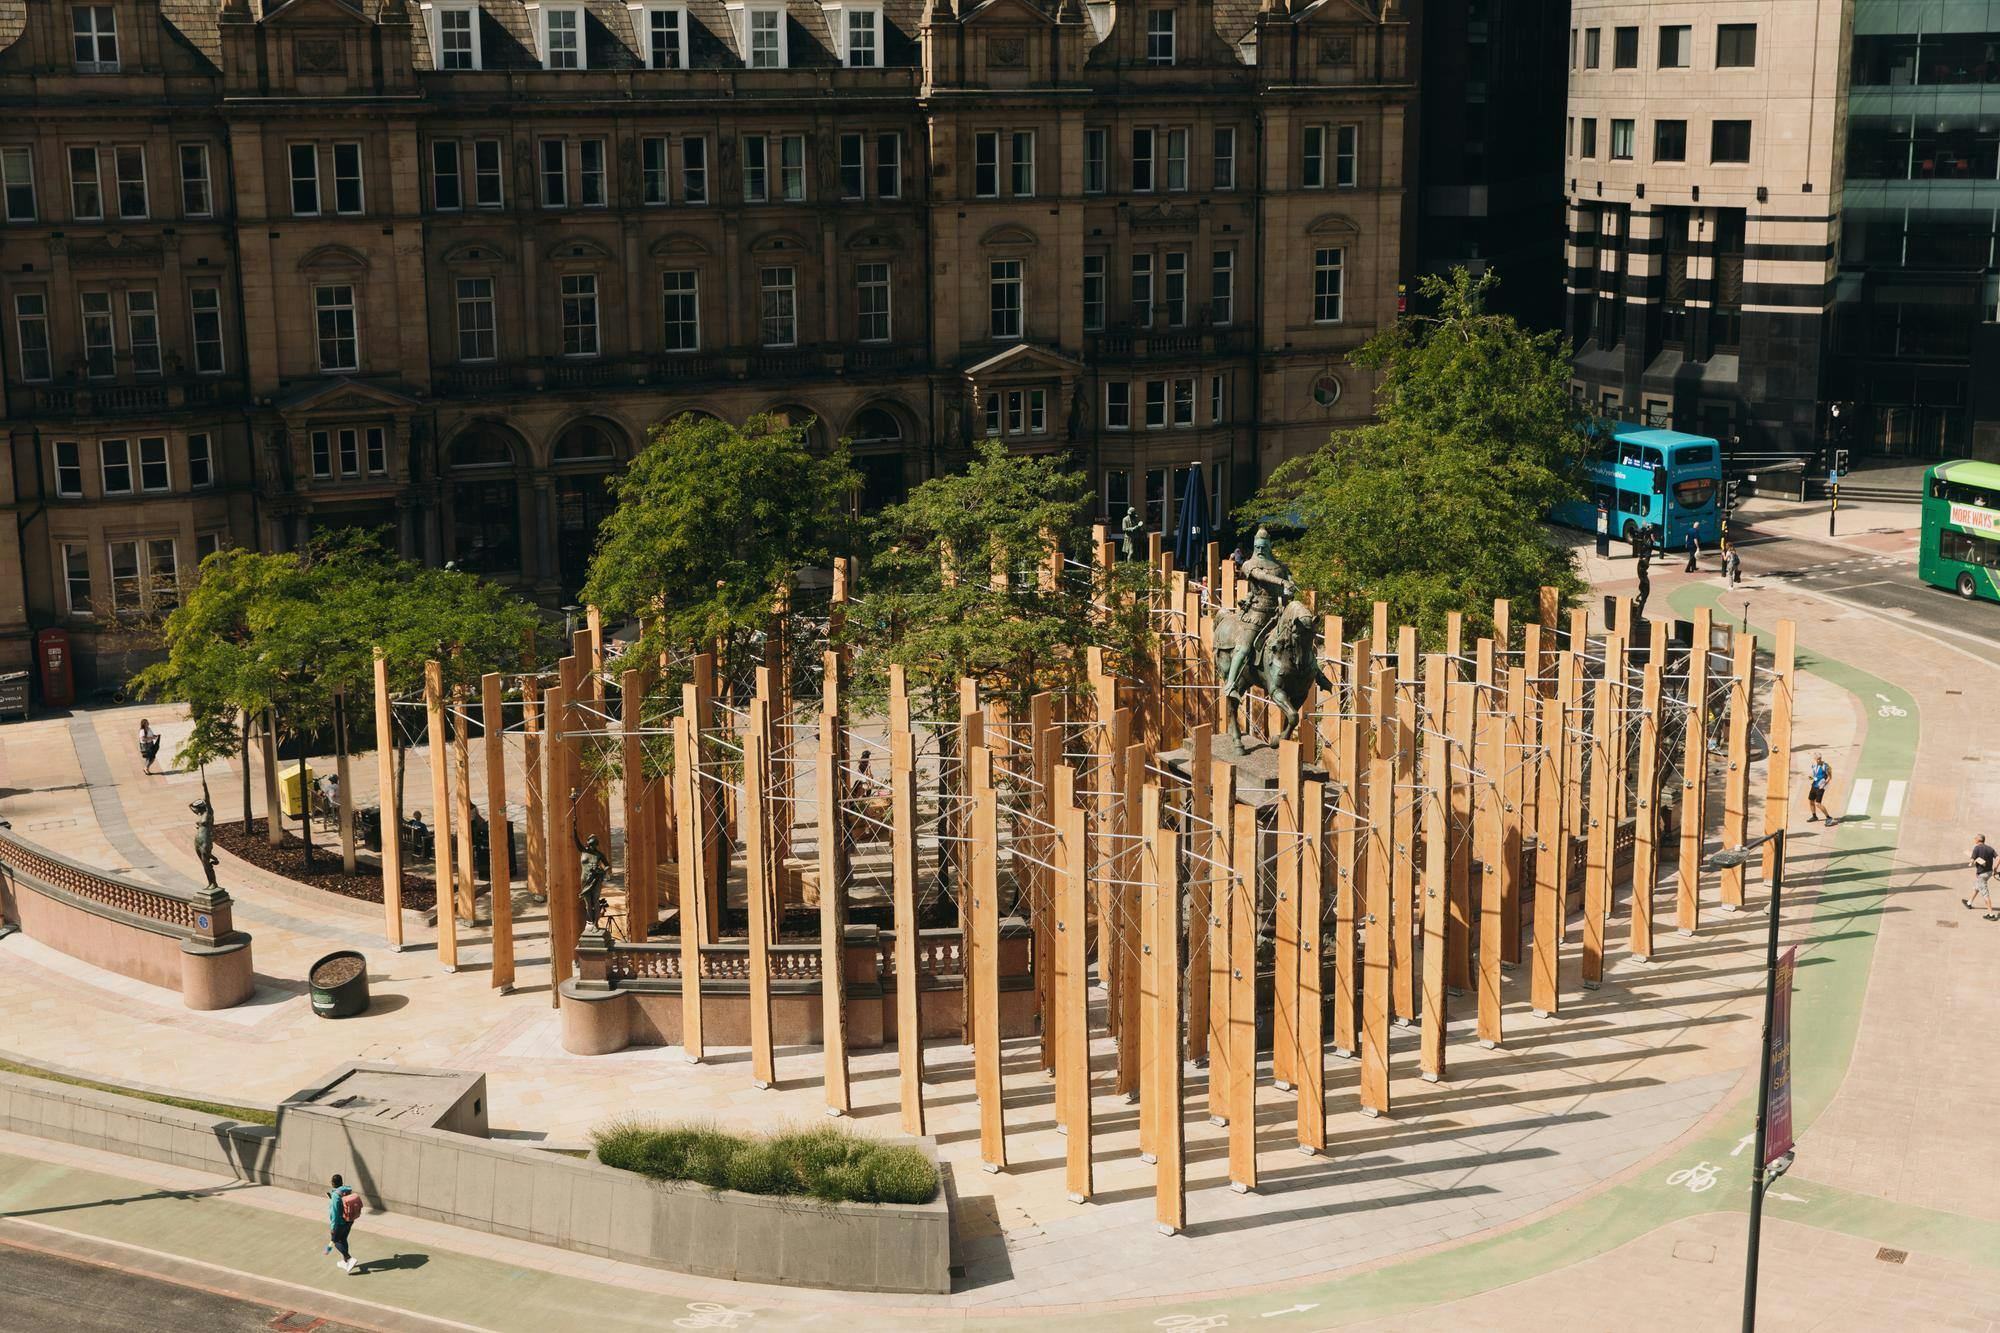 Making A Stand: A collaborative art installation by Studio Bark and Michael Pinsky in Leeds City Centre to make a stand against wasteful supply chains